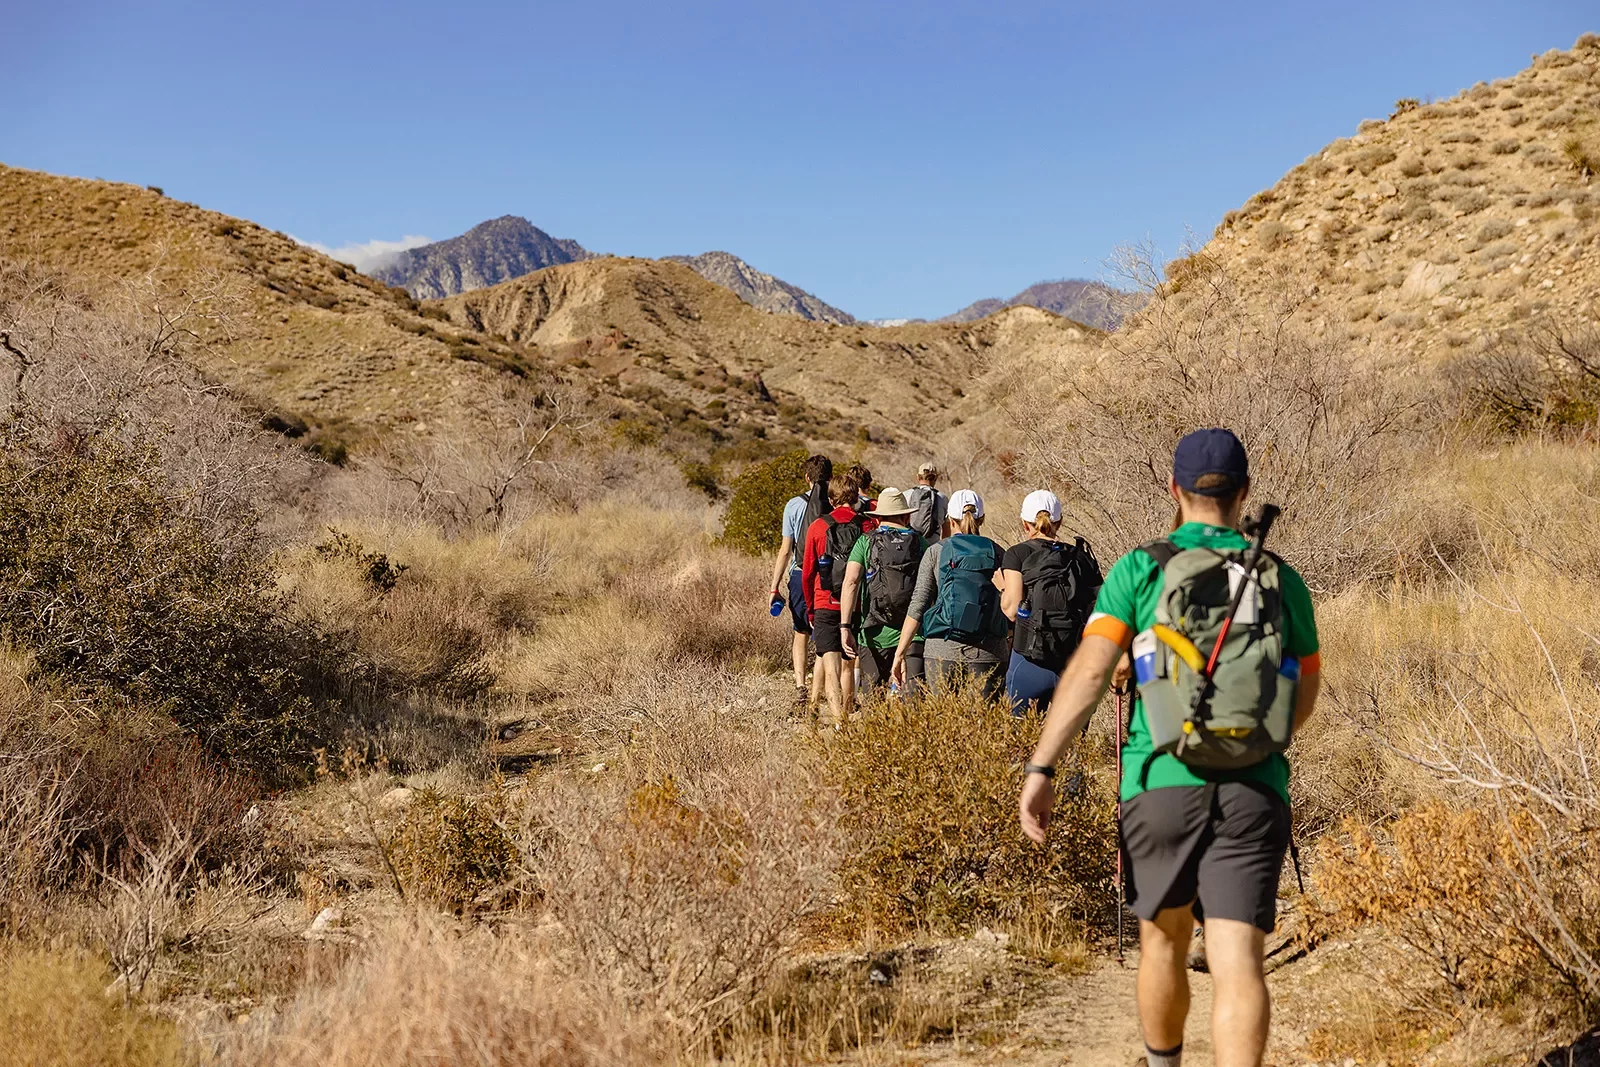 Group of guests hiking is desert, surrounded by bushes and hills.